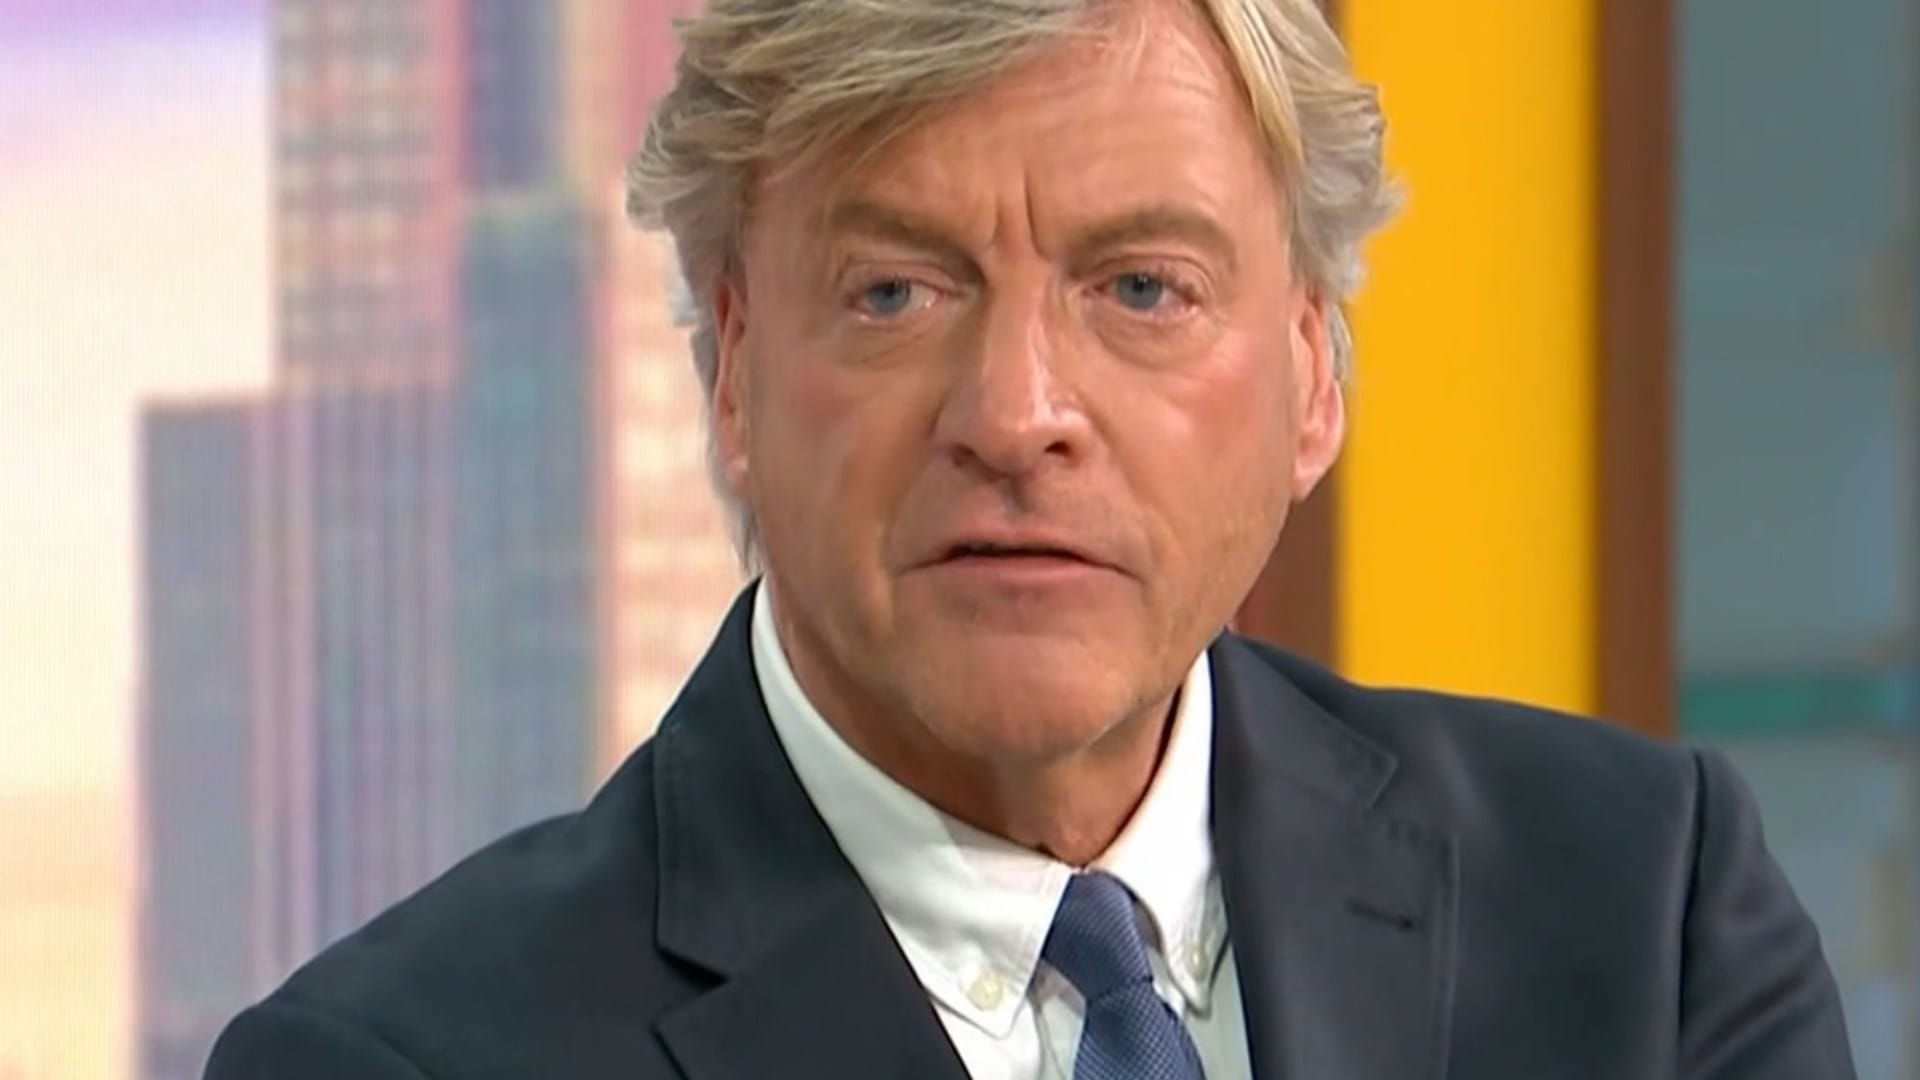 Richard Madeley apologises after being blasted for ‘disgusting’ question to GMB guest over Hamas horror